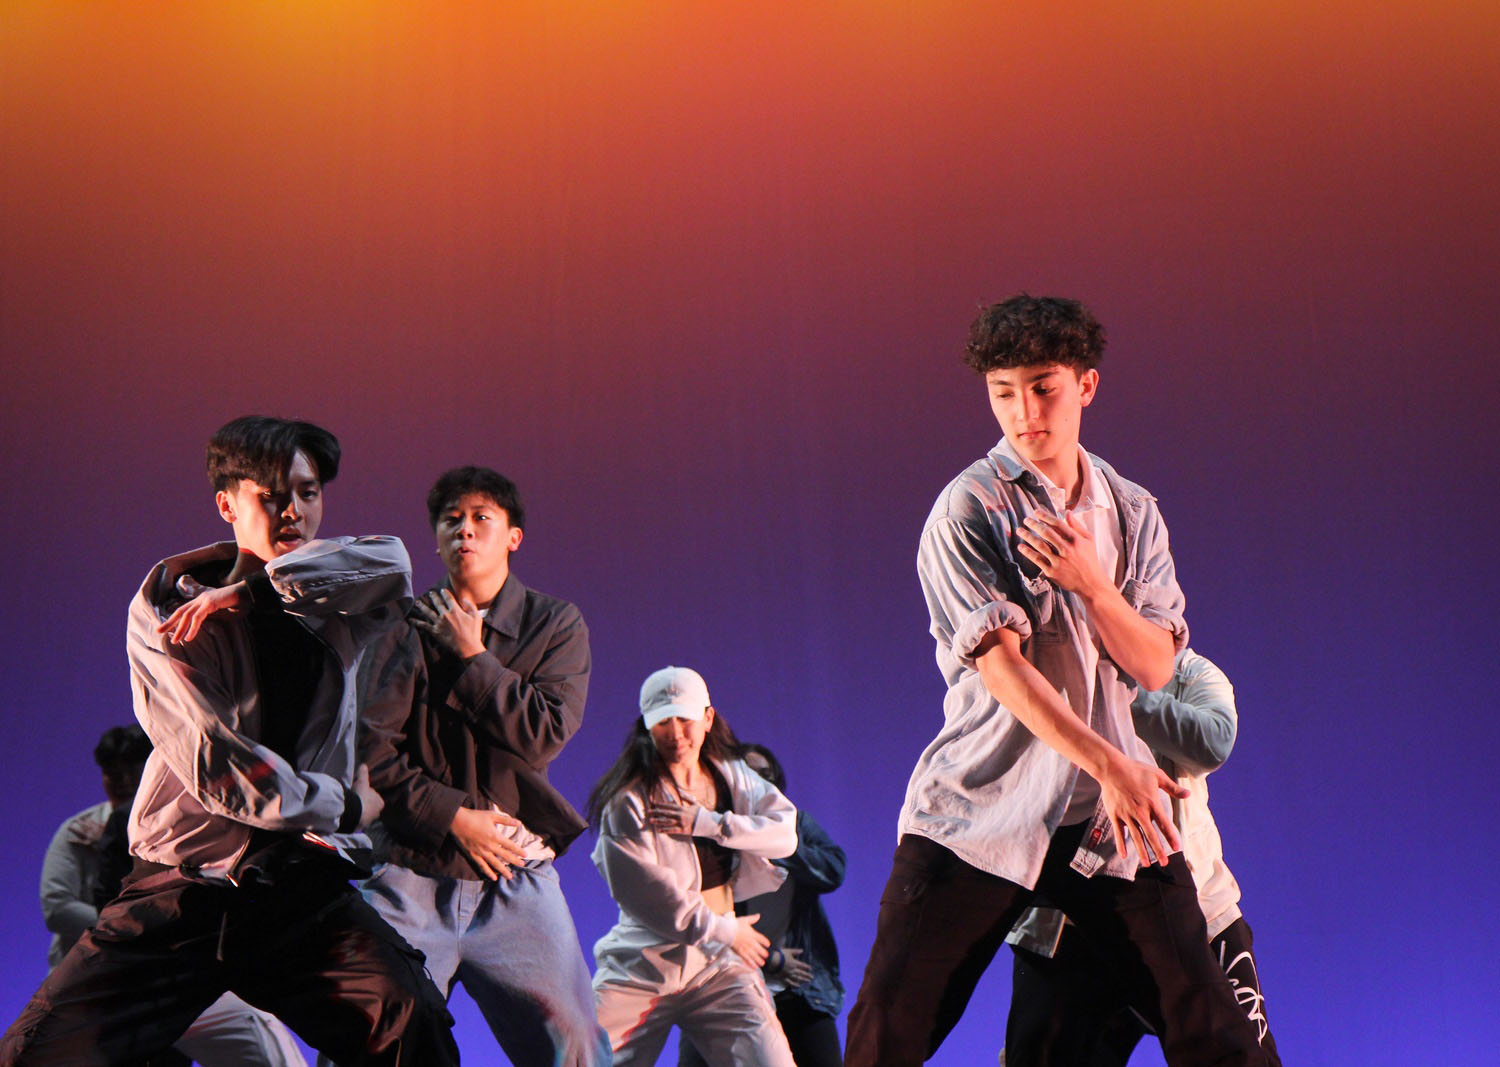 Asian American Dance Troupe (AADT) dancers in the piece “Am I Dreaming” showcased their sophisticated footwork and techniques to pieces from Stray Kids and SVT The8. AADT's 30th annual show, which was completely sold out, was held in the Loeb Drama Center.